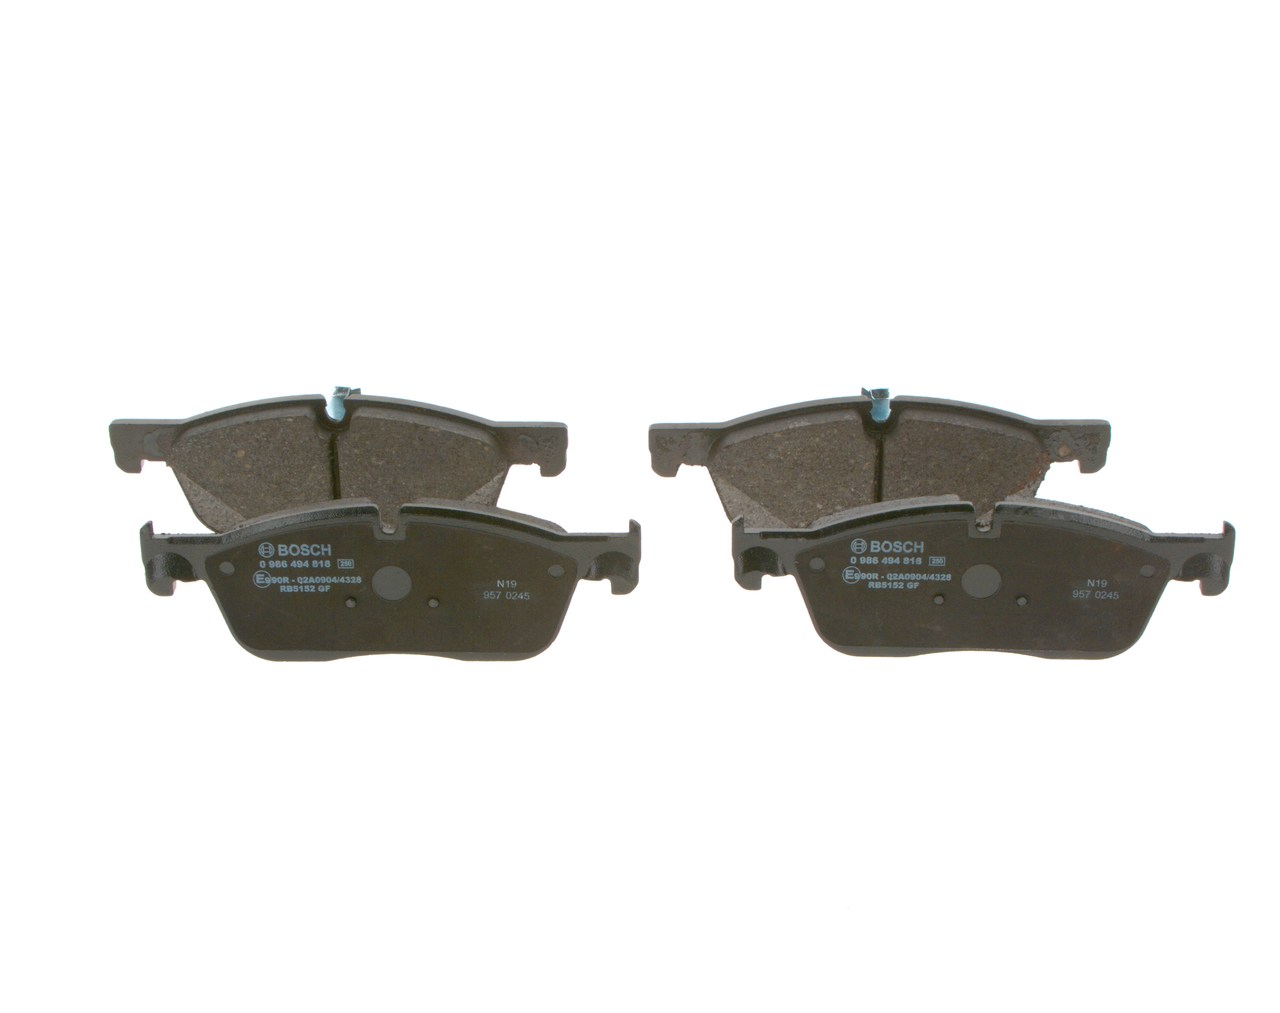 BOSCH 0 986 494 818 Brake pad set LAND ROVER experience and price